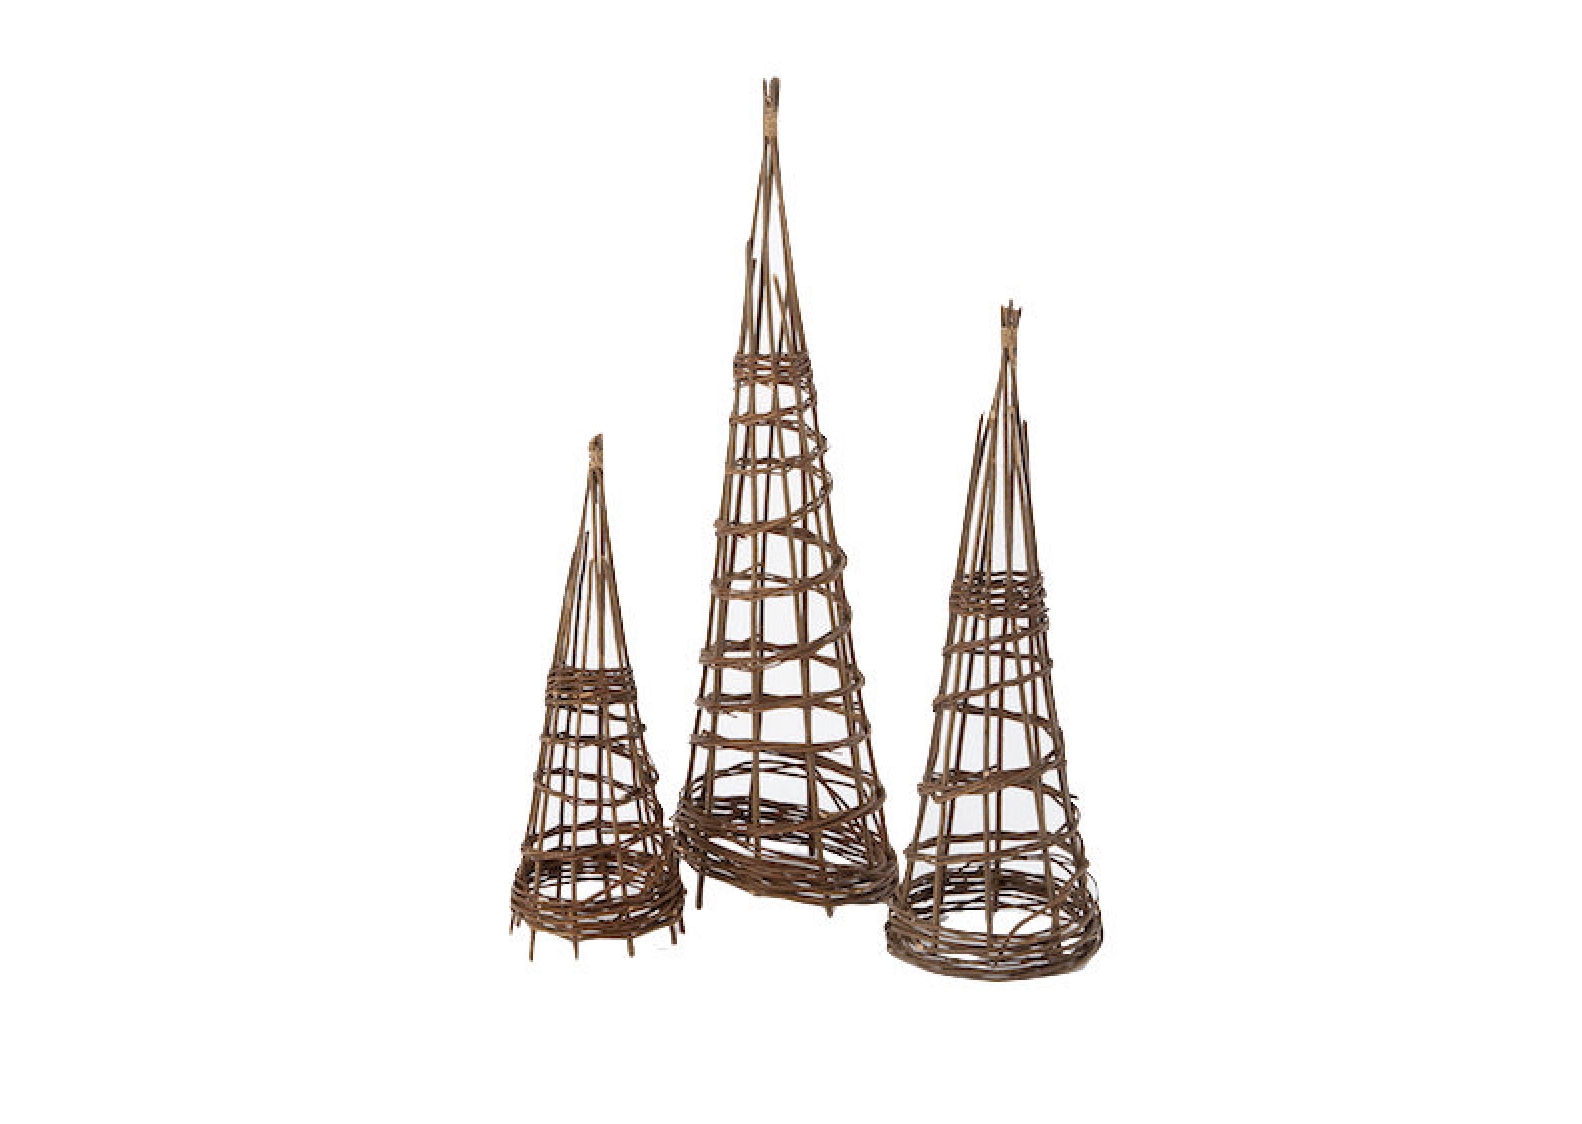 Set of 2 x 120cm High Woven Willow Obelisks Garden Pyramid Plant Supports 